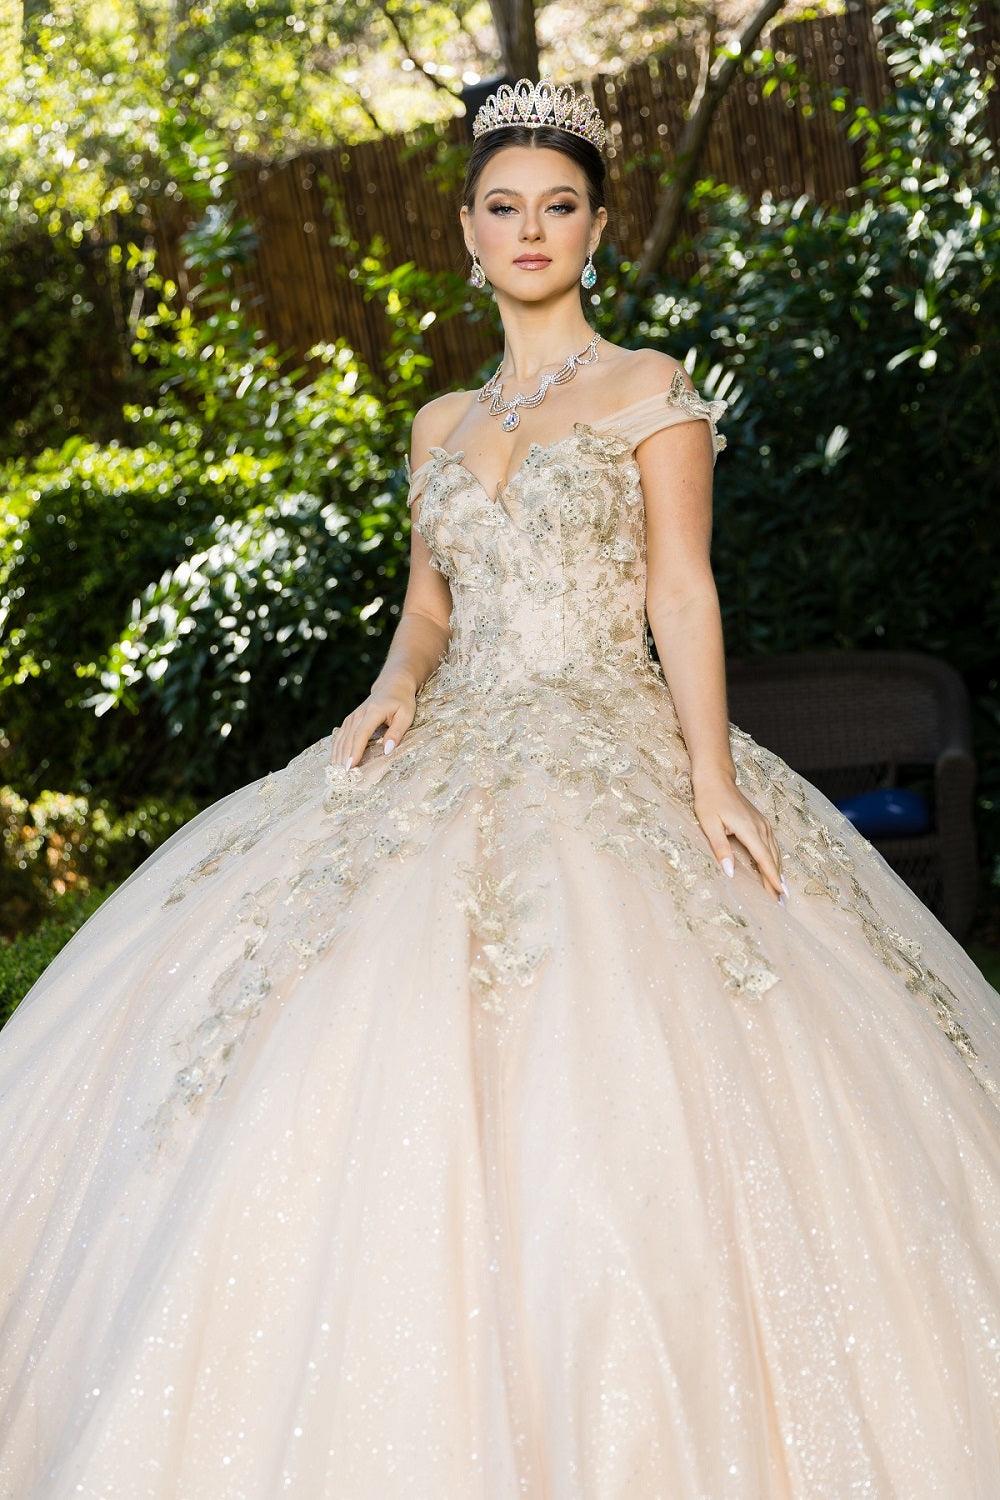 Cinderella Couture CC8046J Sleeveless Glitter Tulle Ball Gown Champagne